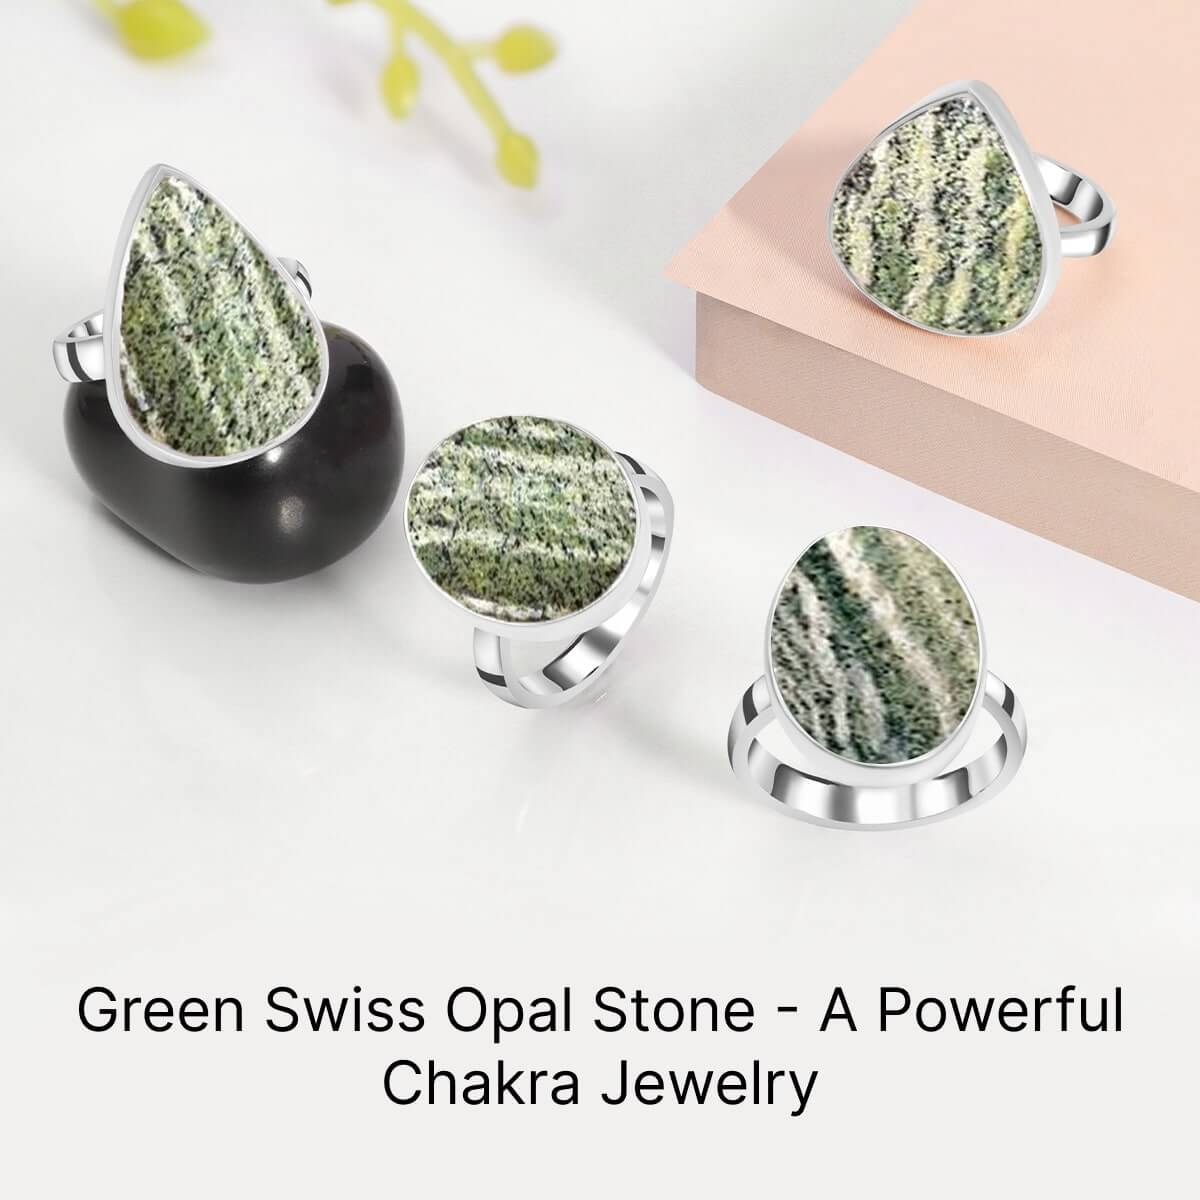 Heal Your Chakras with Green Swiss Opal Stone